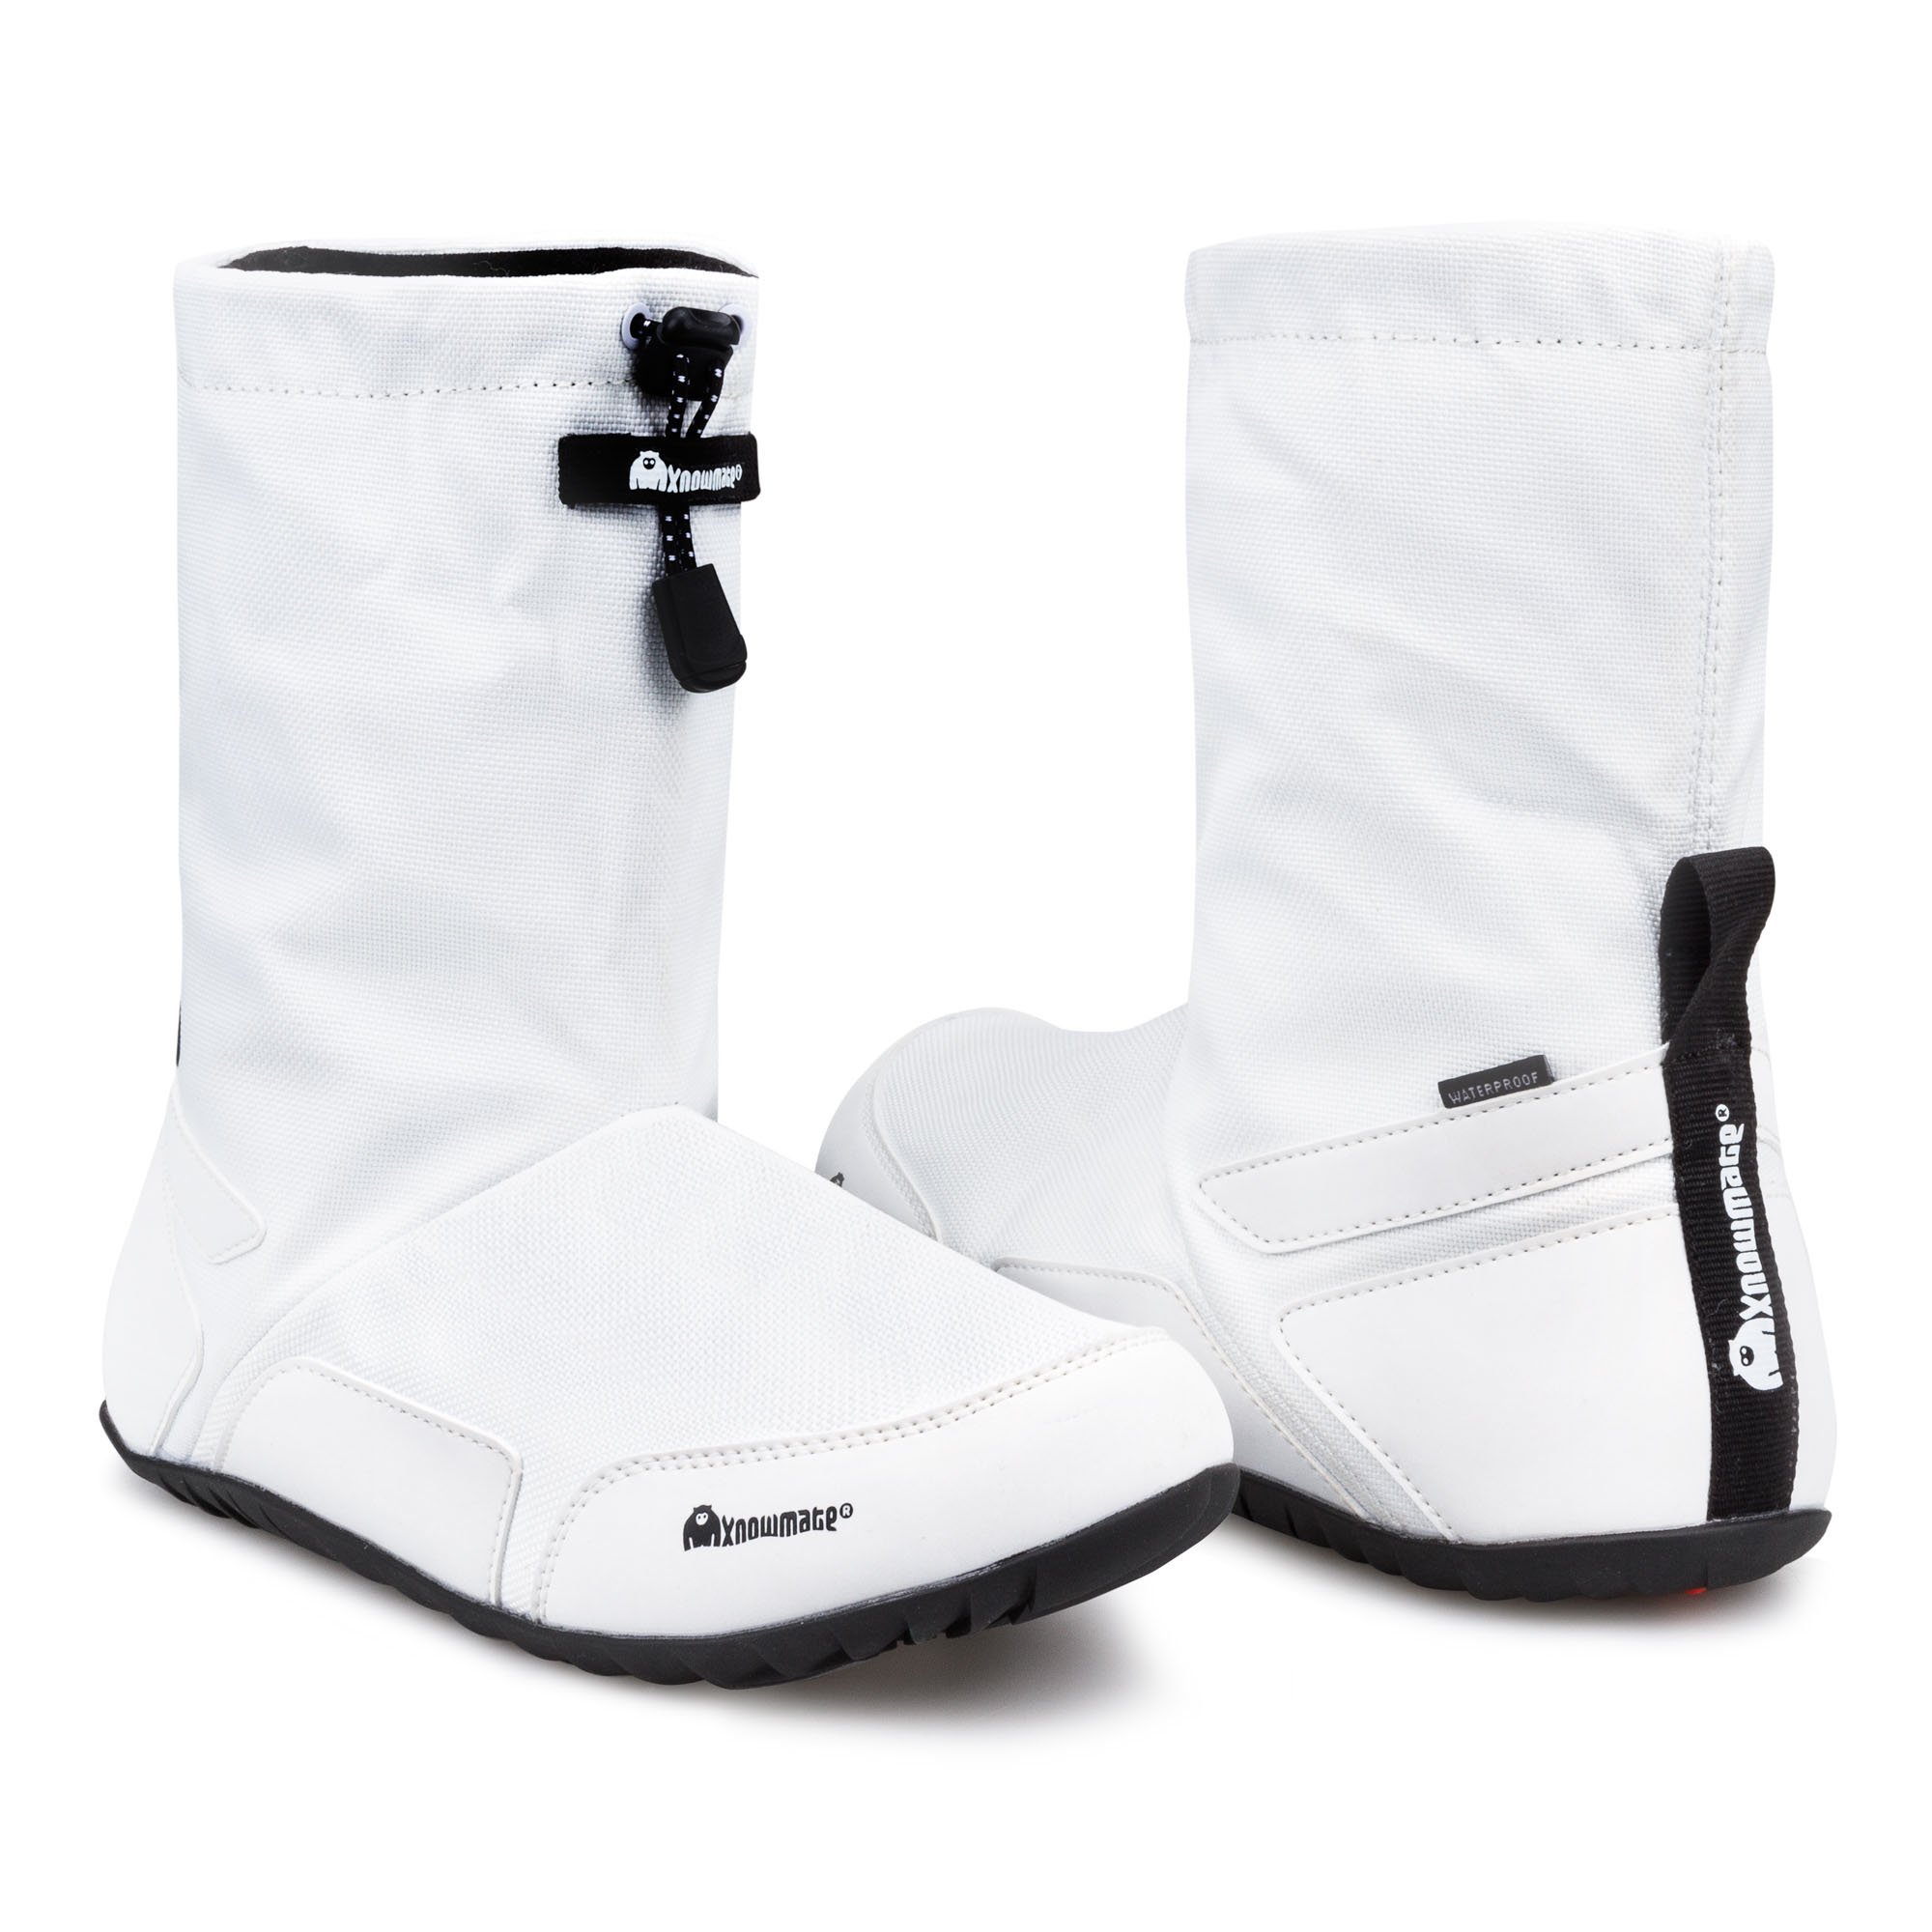 Xnowmate Boots Clear White